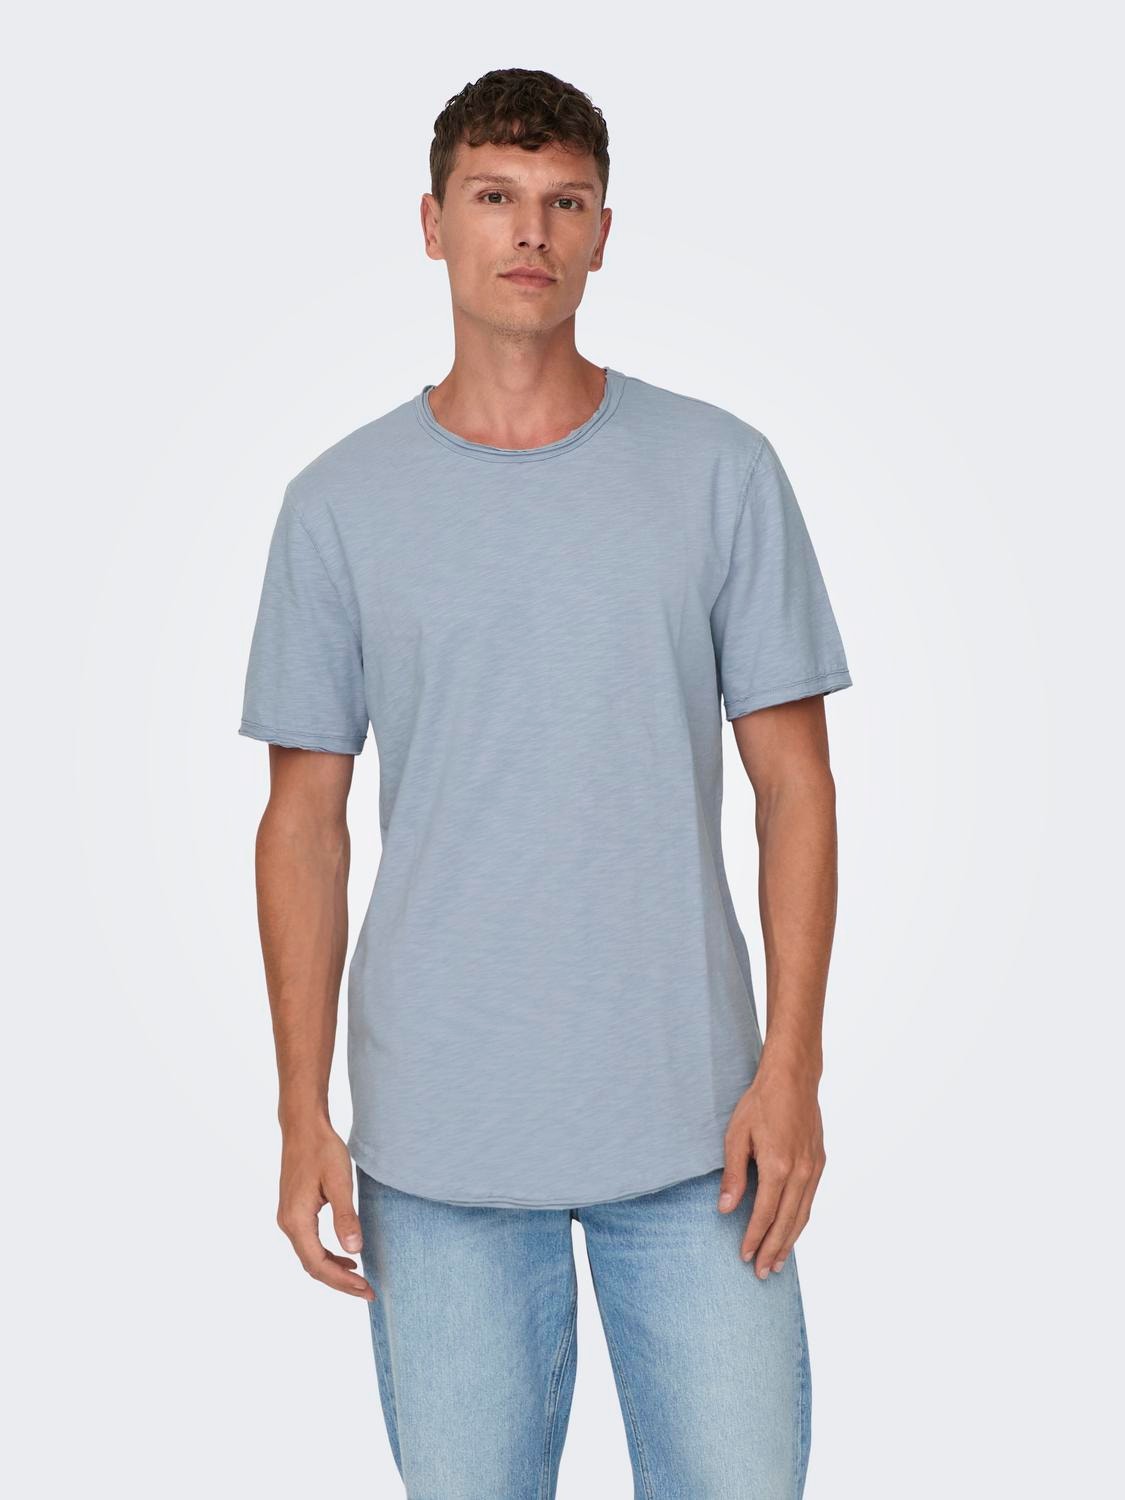 ONLY & SONS Long Line Fit Round Neck T-Shirt -Eventide - 22017822